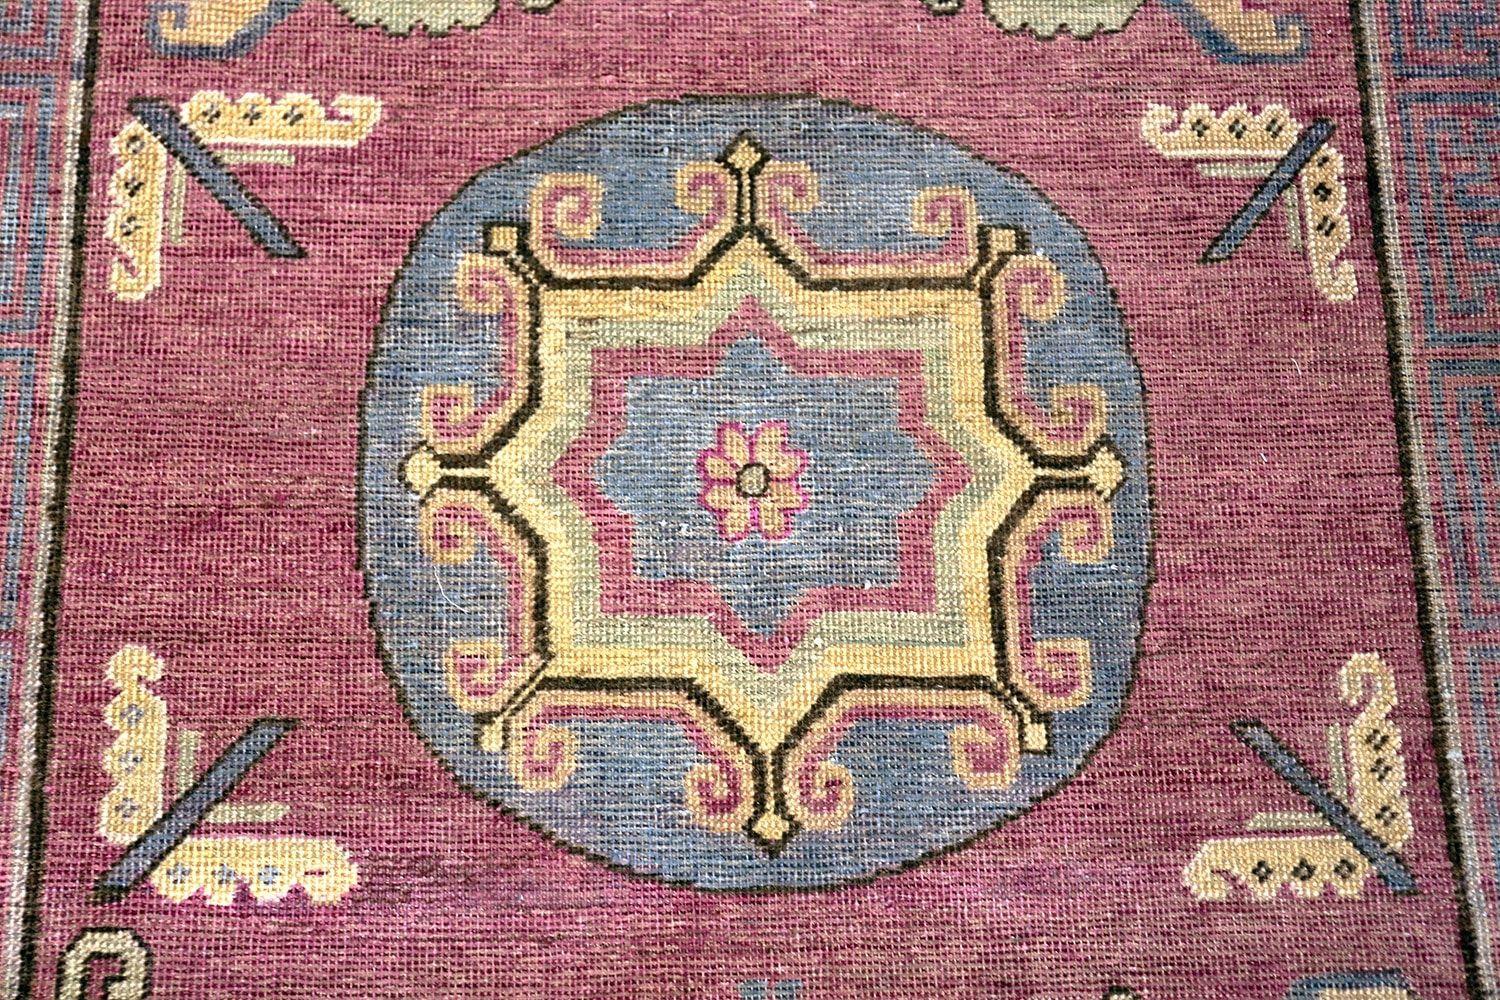 Hand-Knotted Small Tribal Purple Antique Khotan Rug. Size: 4 ft x 8 ft (1.22 m x 2.44 m)